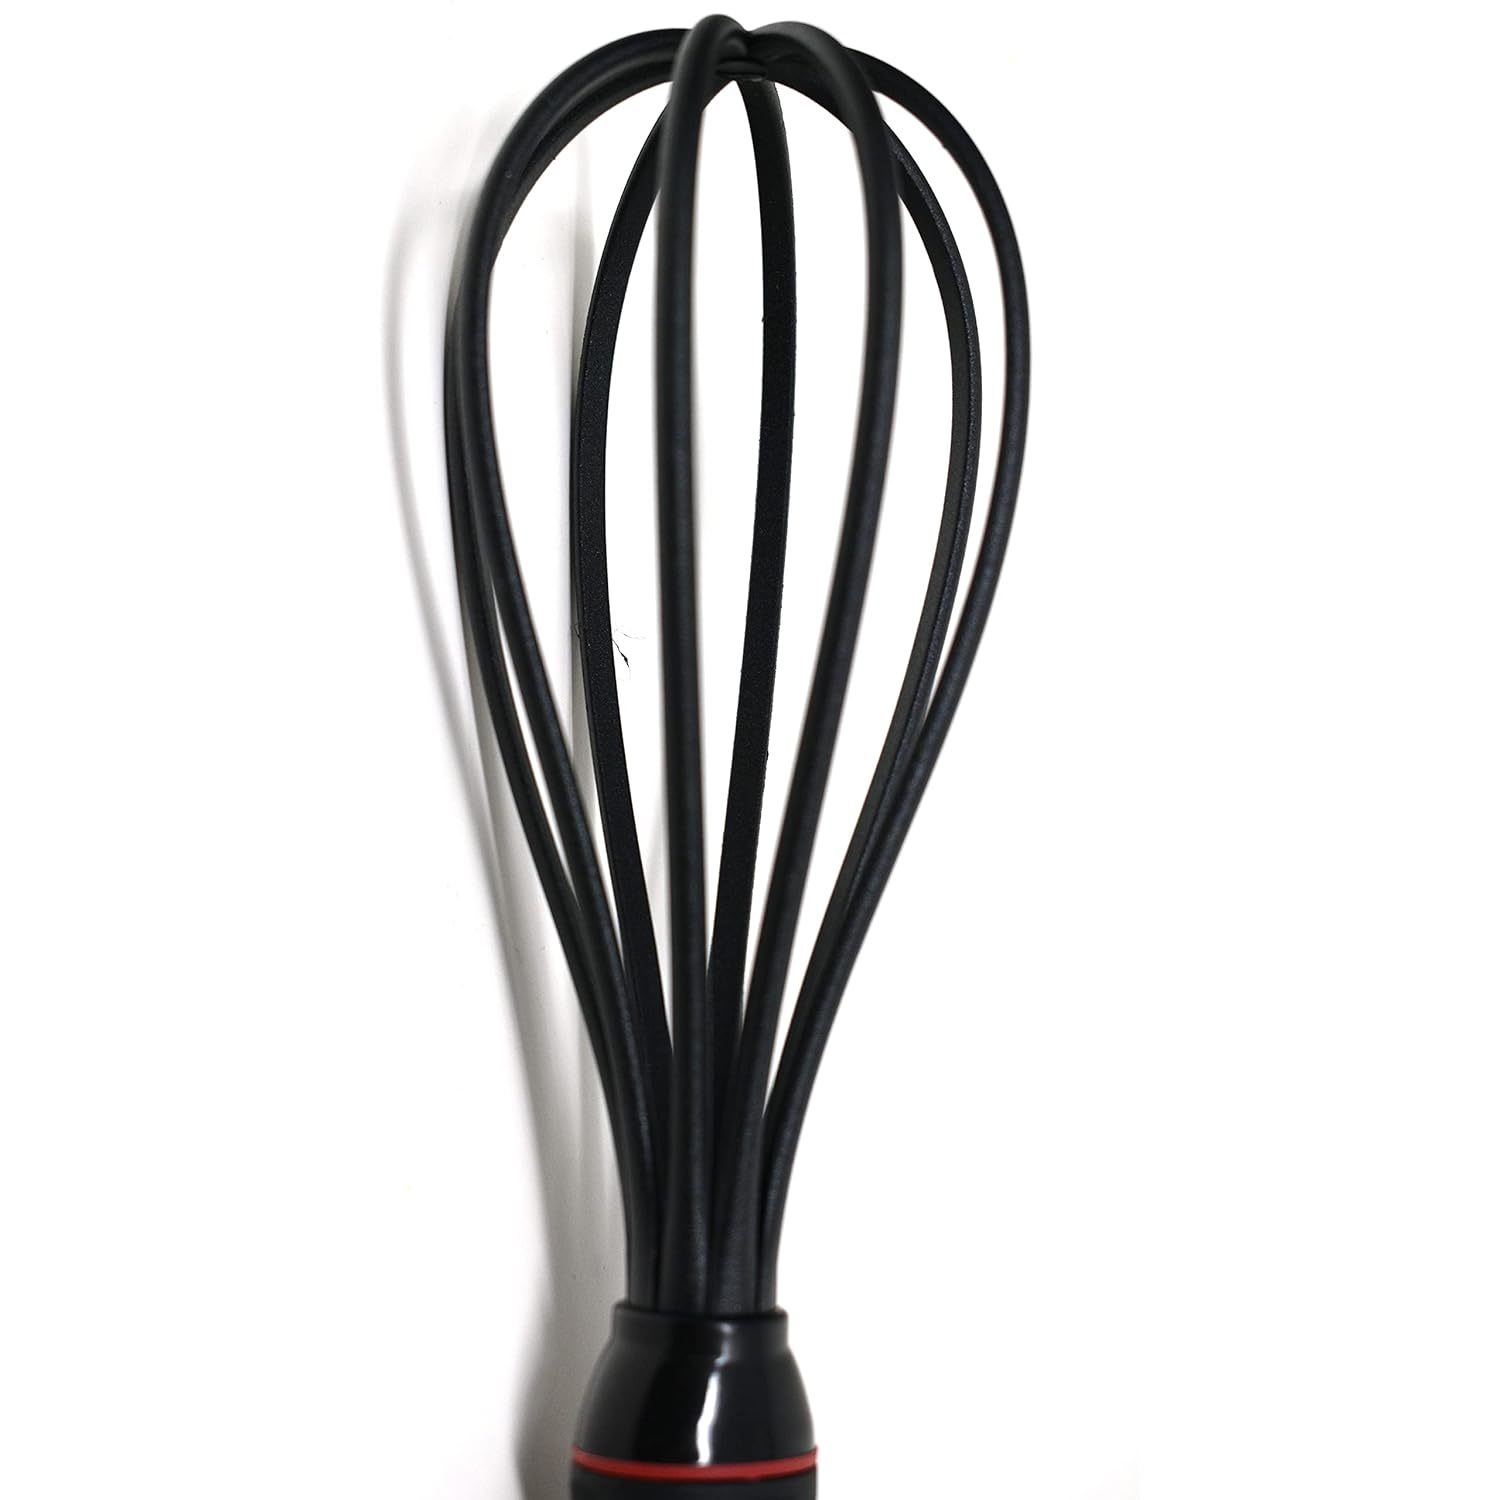  Norpro Cocktail Whisk (1, 1 Ounce), White: Home & Kitchen